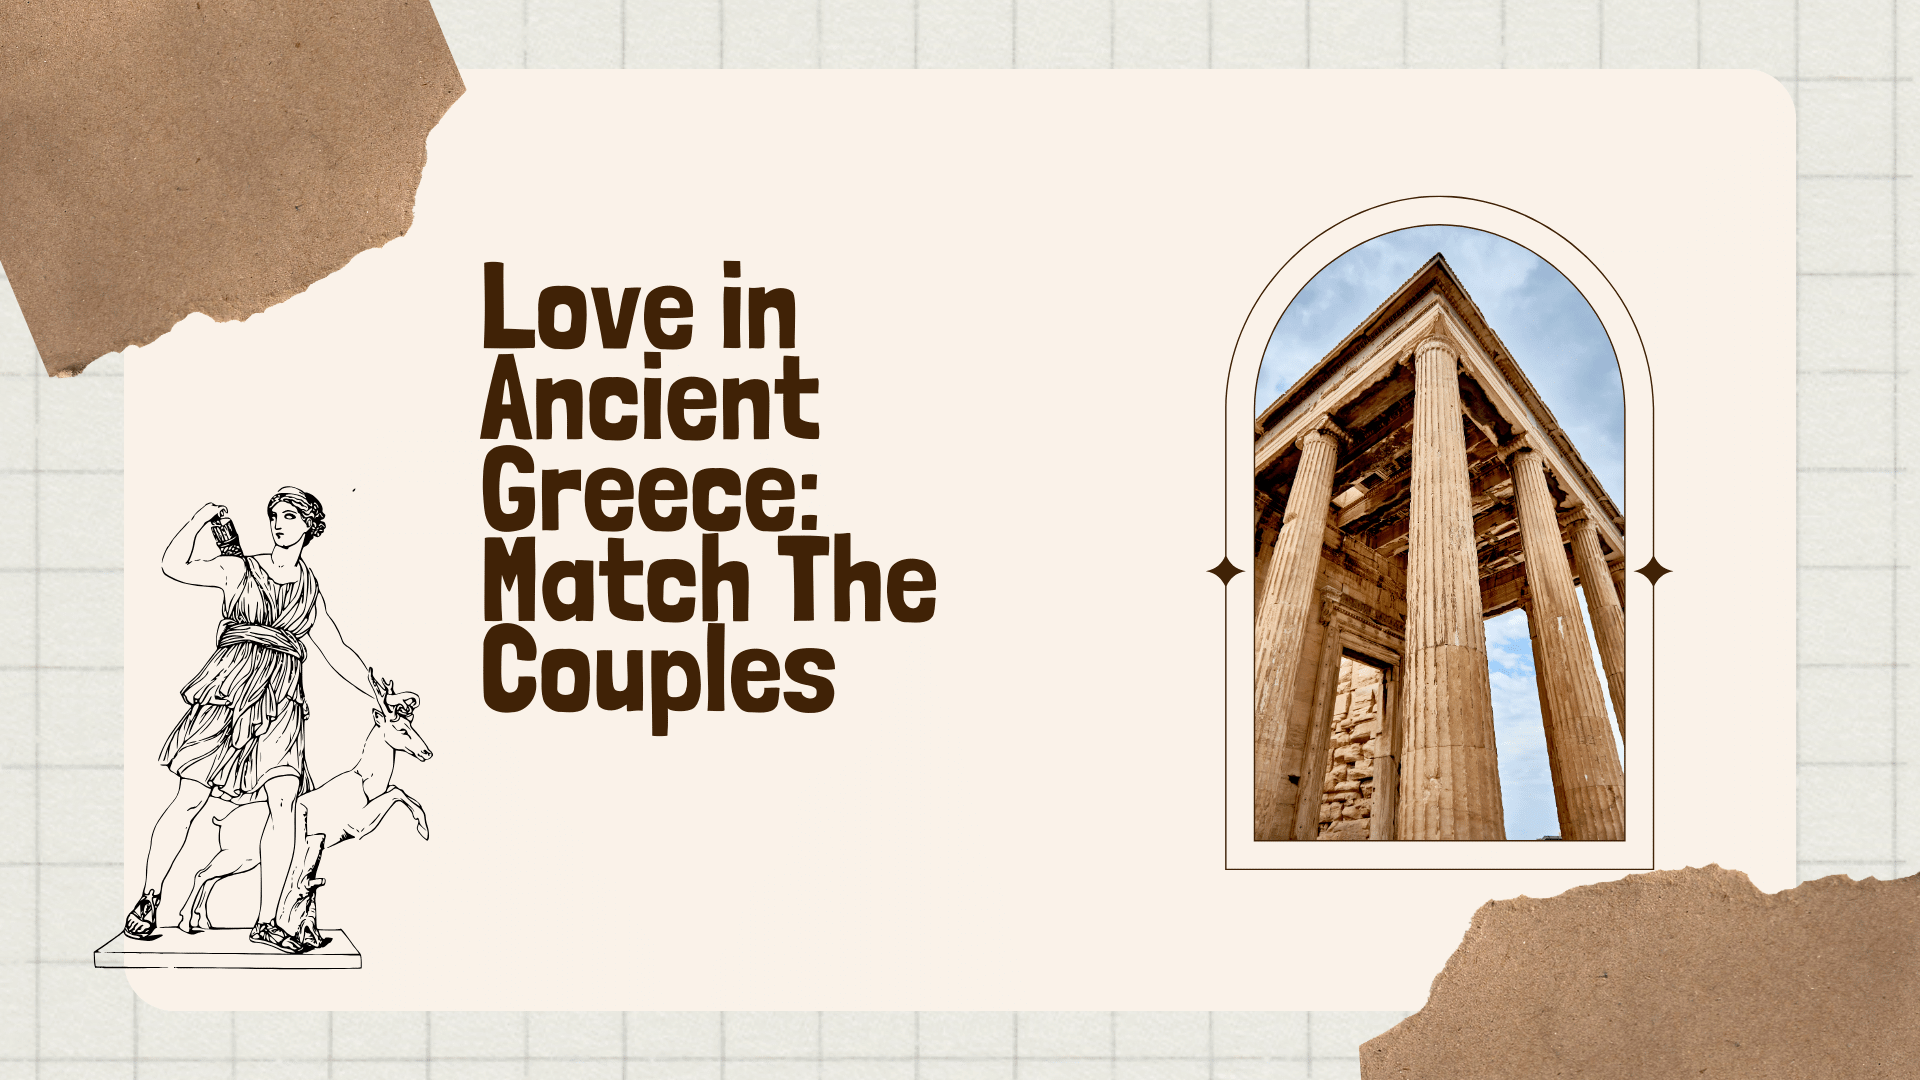 Love in Ancient Greece: Match The Couples